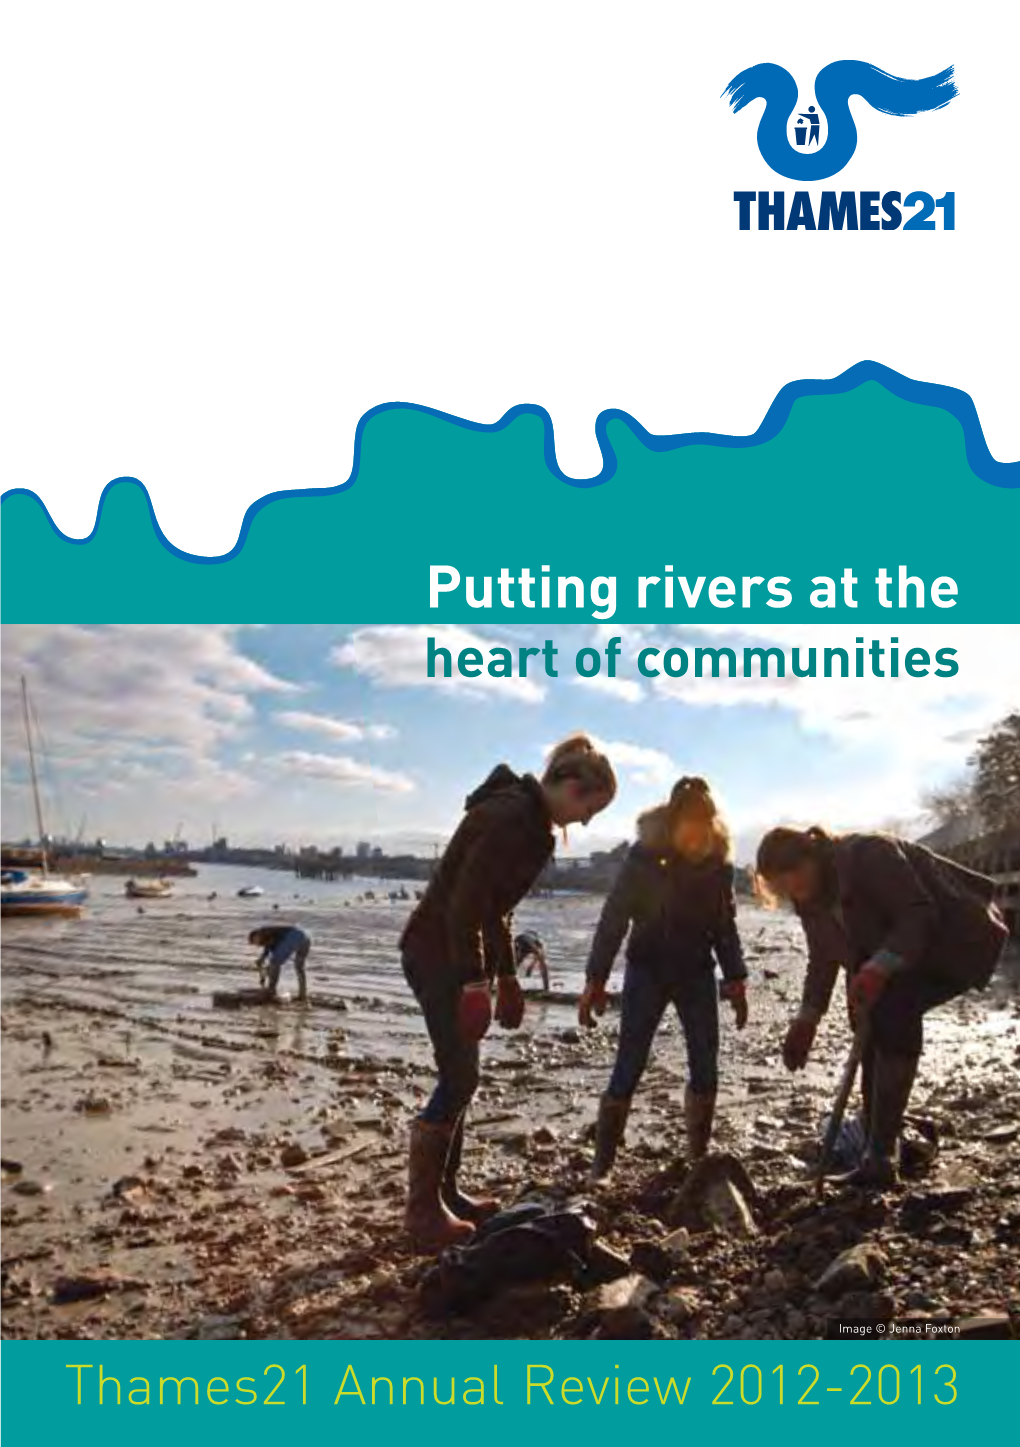 Thames21 Annual Review 2012-2013 Our Purpose from the Chairman’S Statement